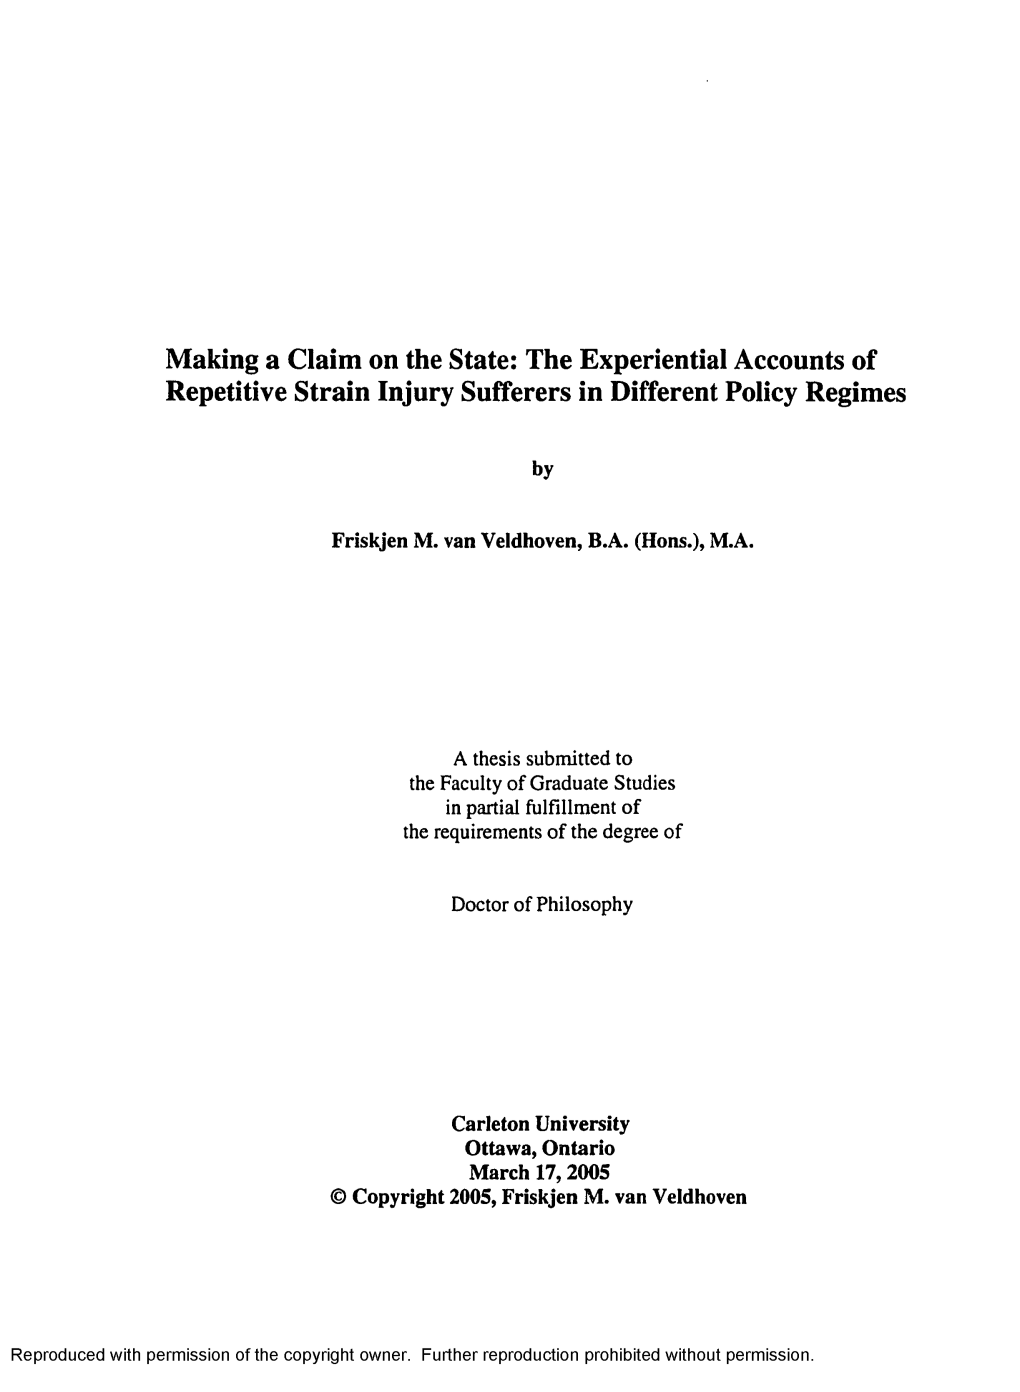 Making a Claim on the State: the Experiential Accounts of Repetitive Strain Injury Sufferers in Different Policy Regimes